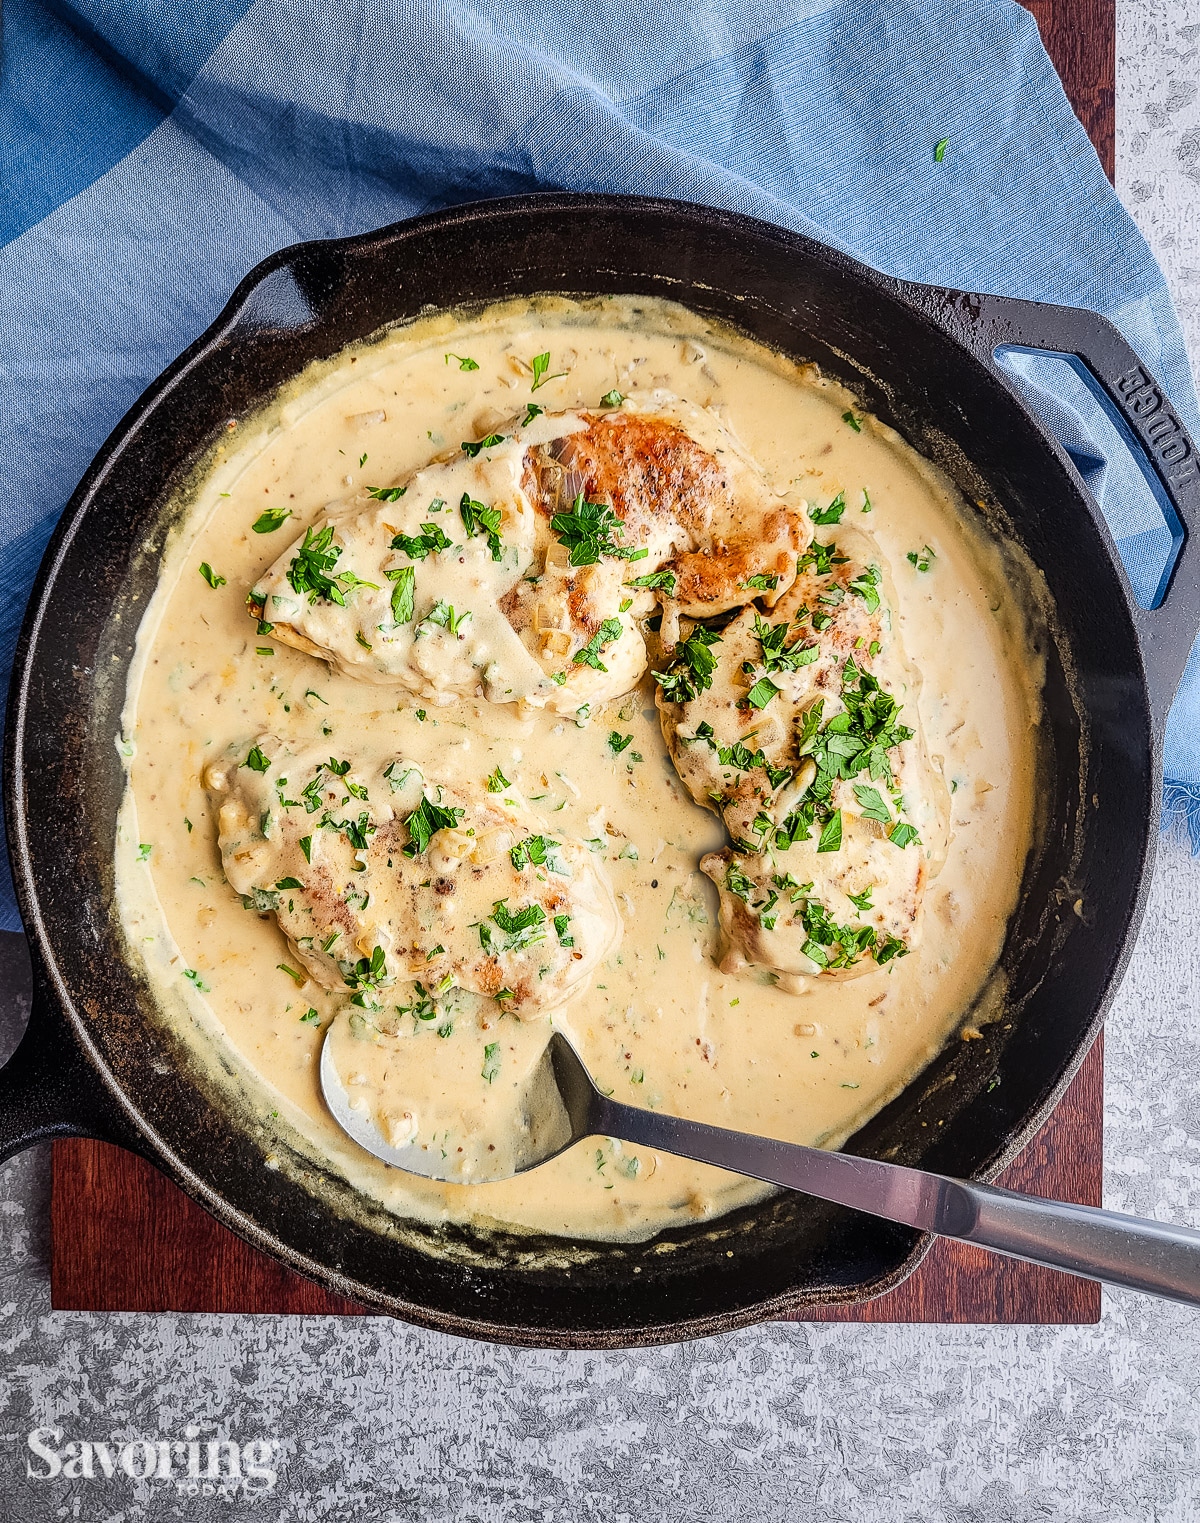 creamy sauce over chicken breasts in a cast iron skillet set over a blue towel